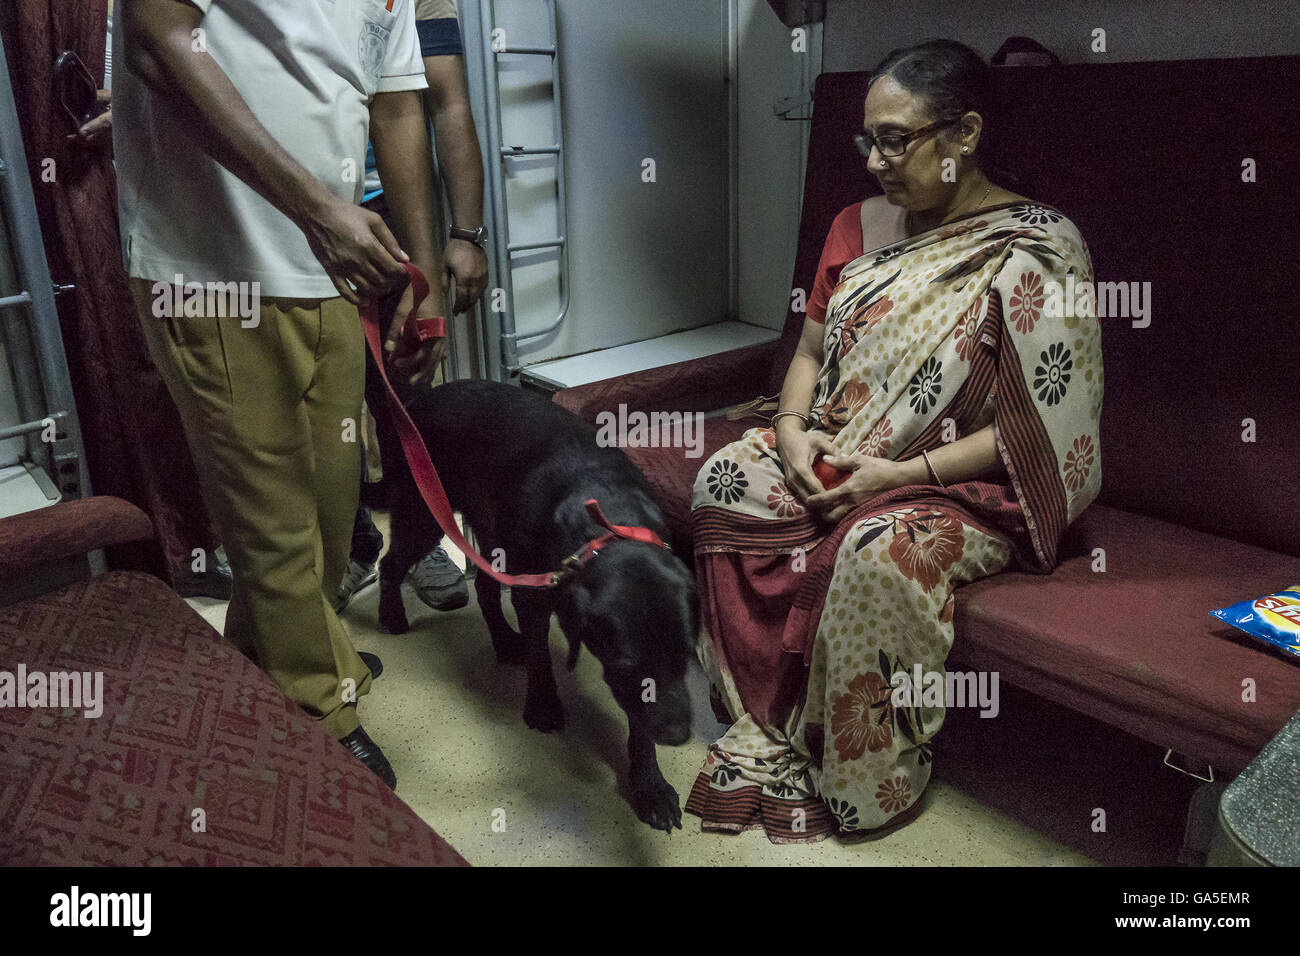 (160703) -- KOLKATA (INDIA), July 3, 2016 (Xinhua) -- An Indian security staff checks Rajdhani Express with a sniffer dog at Howrah station in Kolkata, capital of eastern Indian state West Bengal, July 3, 2016. The terror attack at a cafe in the Bangladeshi capital of Dhaka Friday night has created a panic in India's eastern state of West Bengal and some northeast states. International borders with Bangladesh were sealed Saturday by India's Border Security Force (BSF) and several states were put on high alert by Home Ministry. (Xinhua/Tumpa Mondal) (zjy) Stock Photo